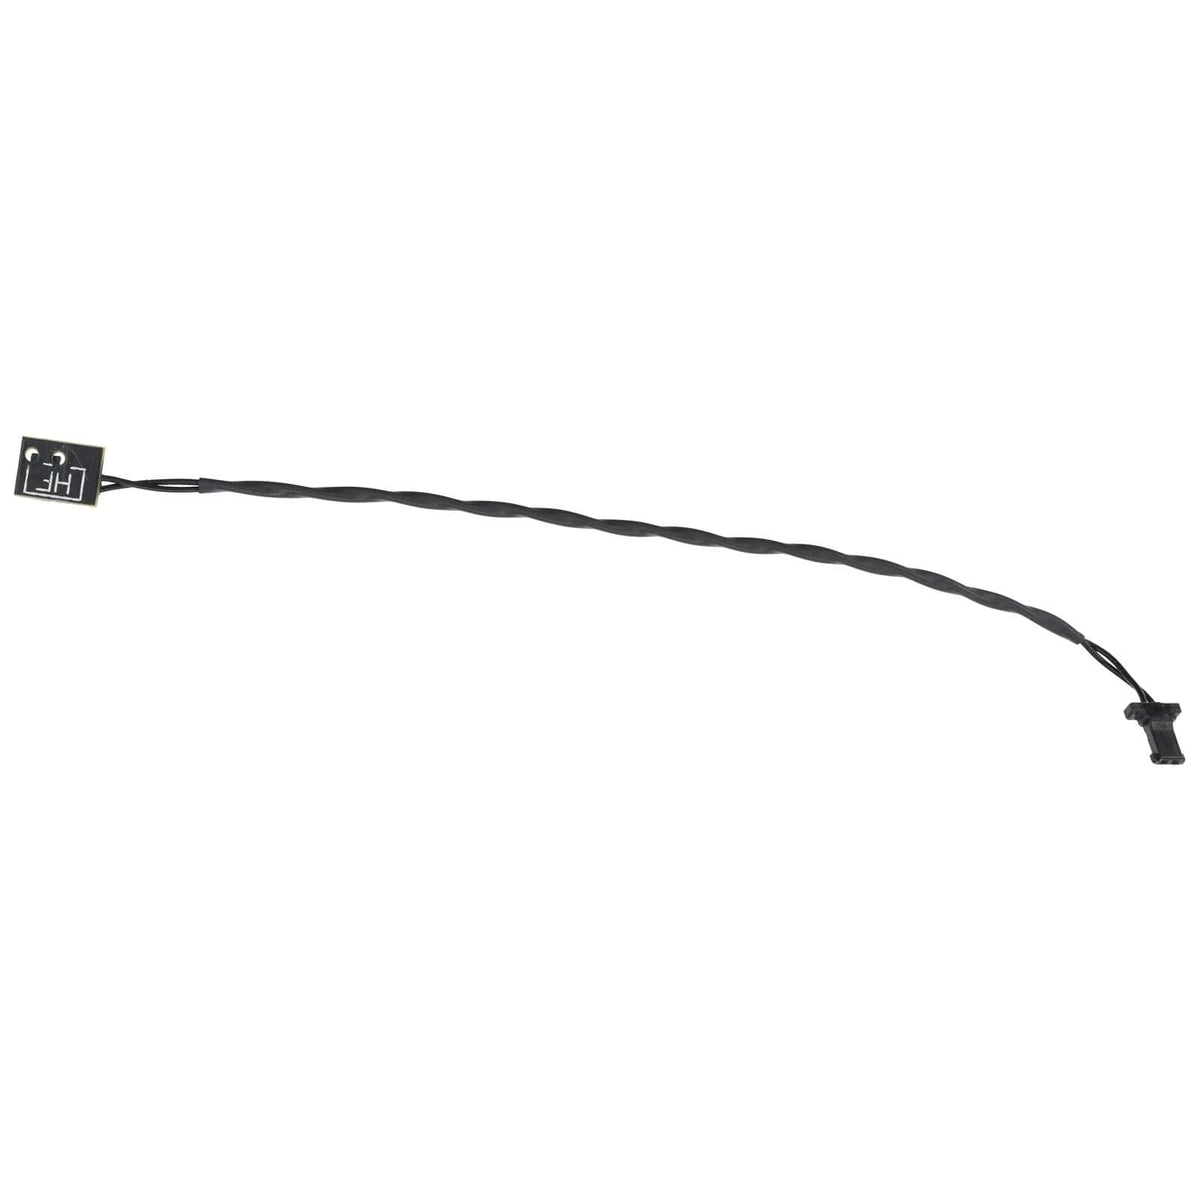 LCD TEMPERATURE SENSOR CABLE FOR IMAC 27" A1419/A2115 (LATE 2012,MID 2020) 923-0310